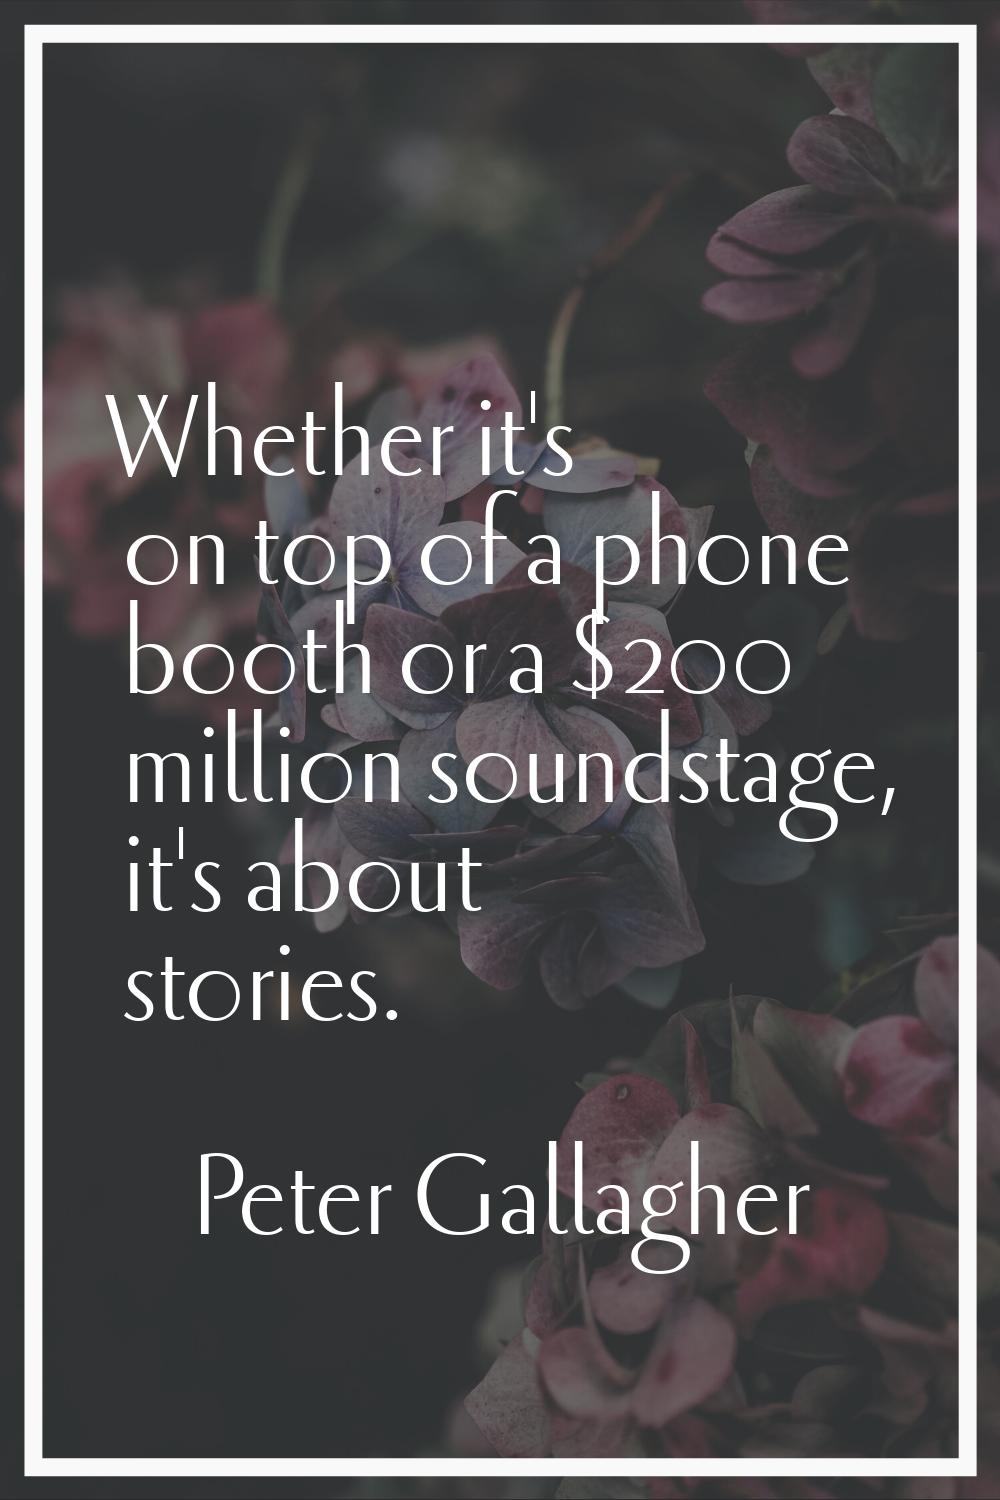 Whether it's on top of a phone booth or a $200 million soundstage, it's about stories.